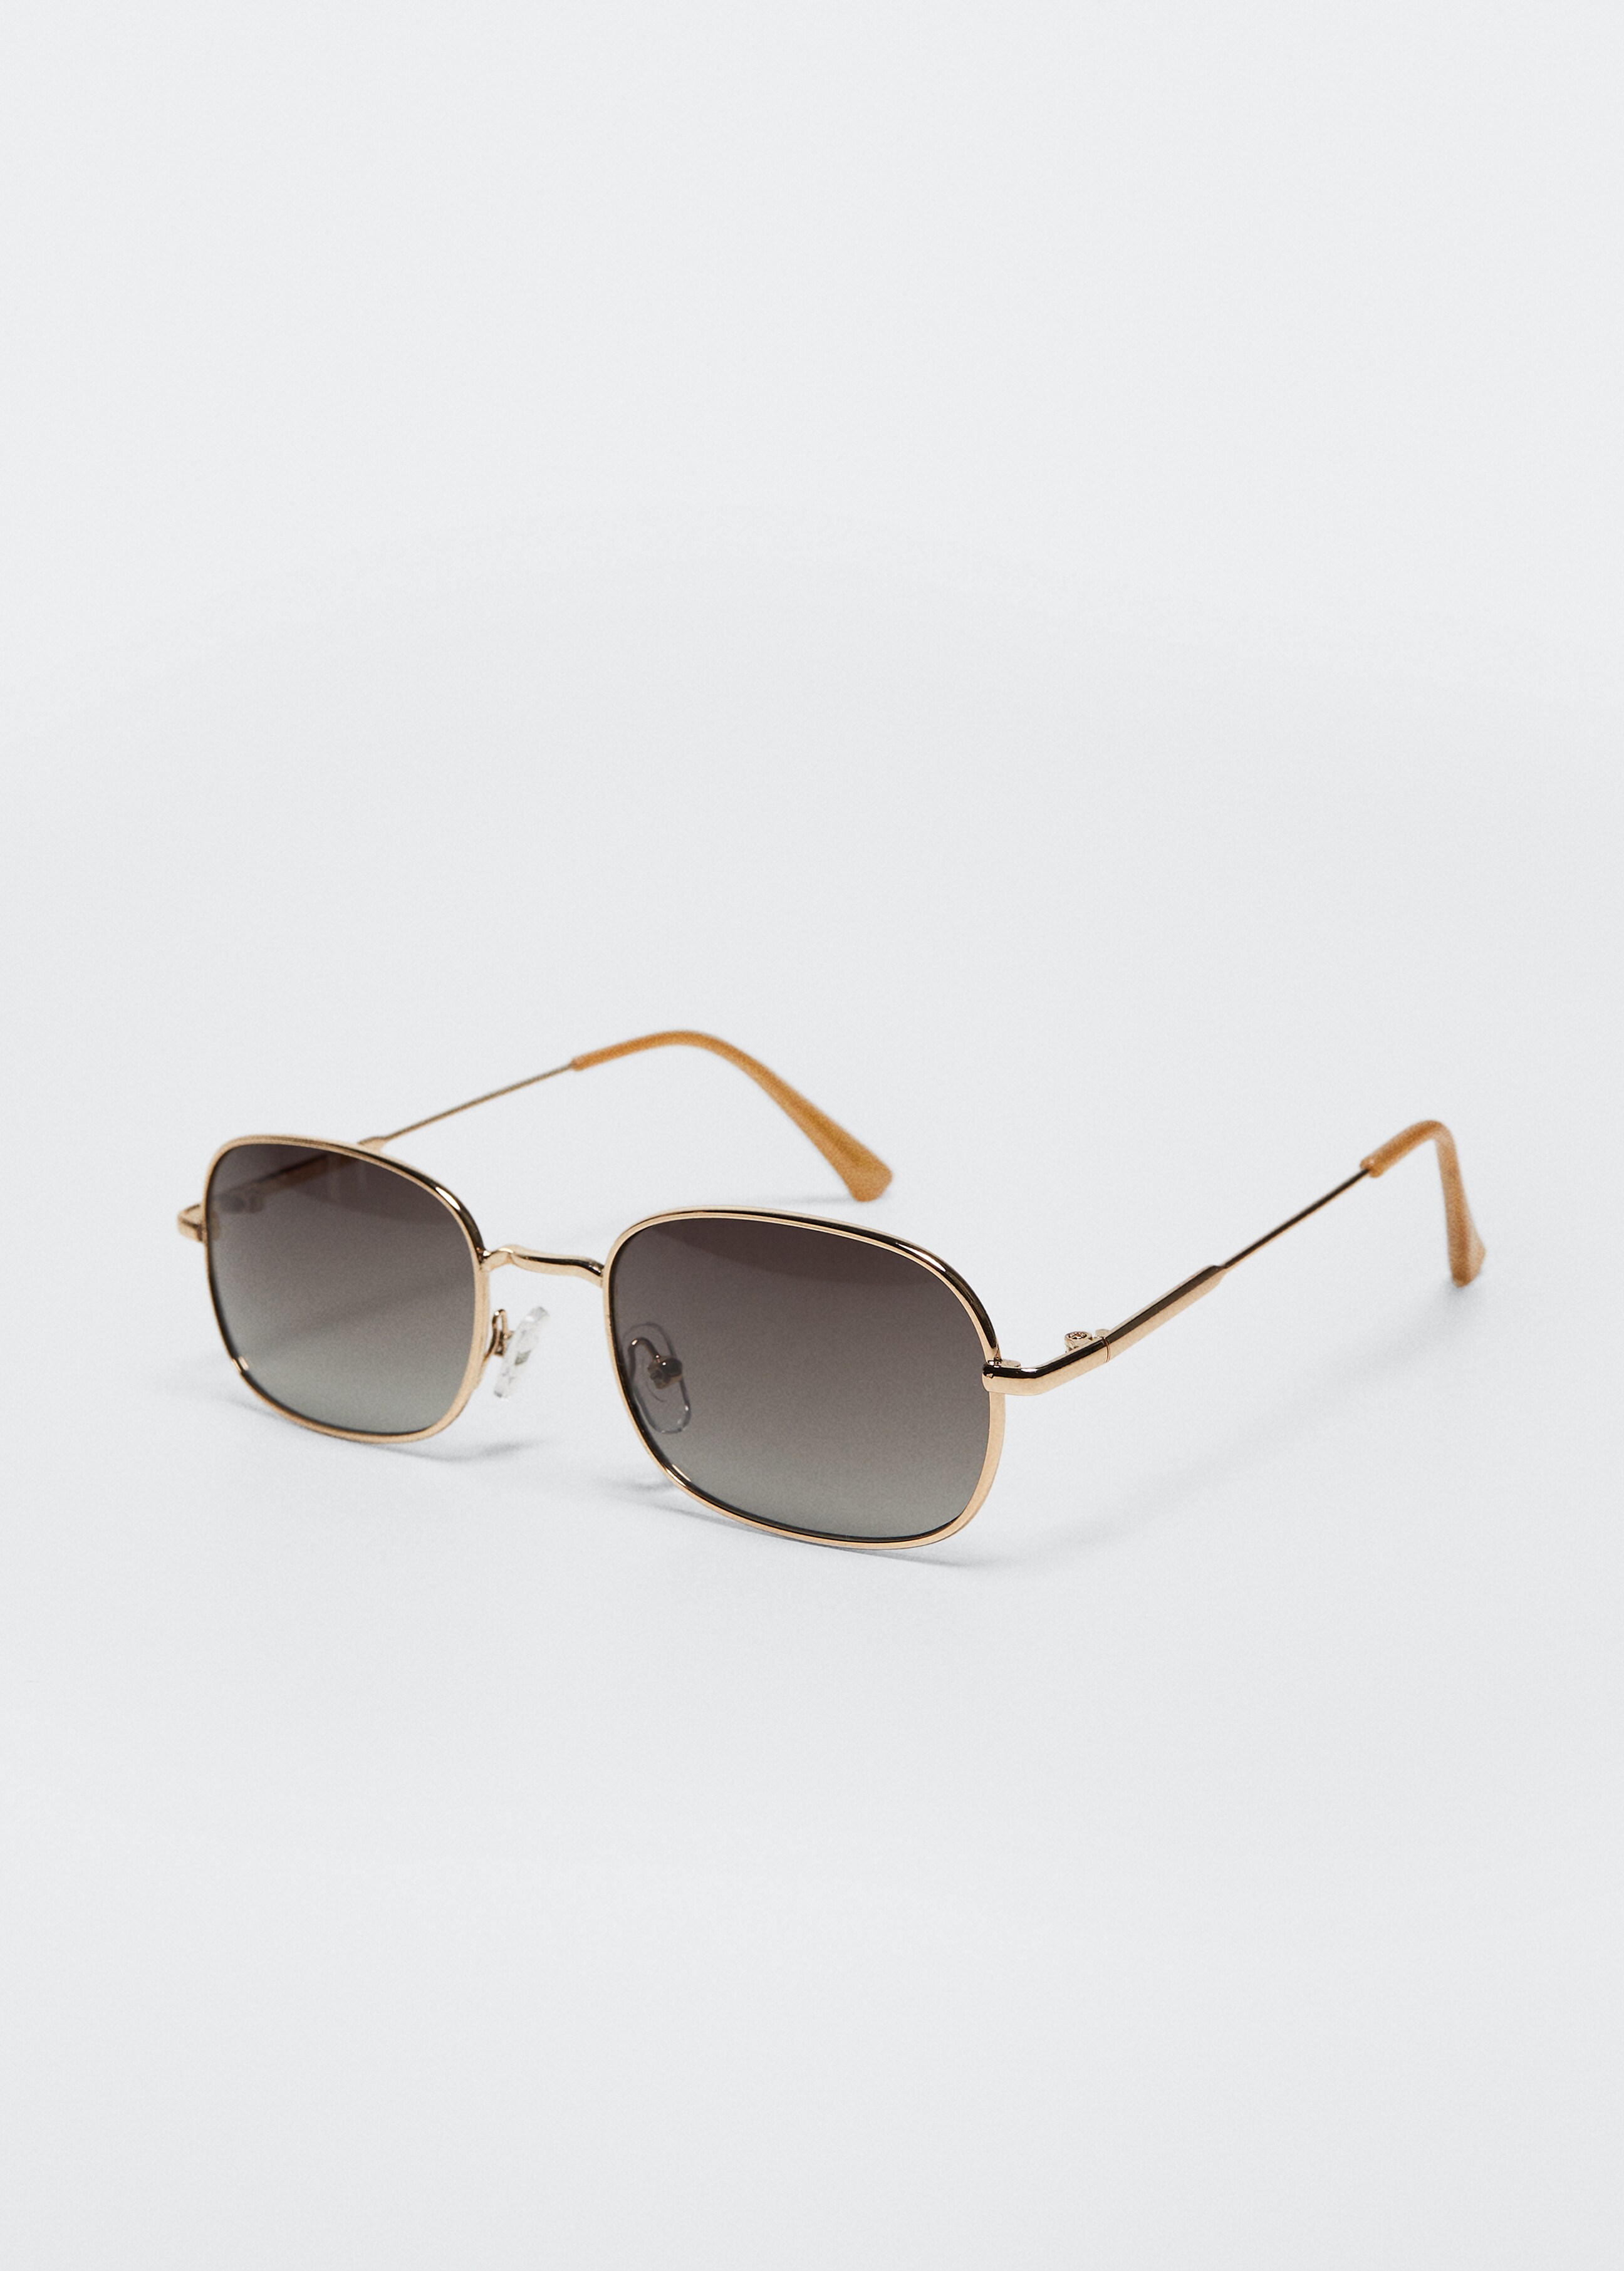 Metallic frame sunglasses - Details of the article 3